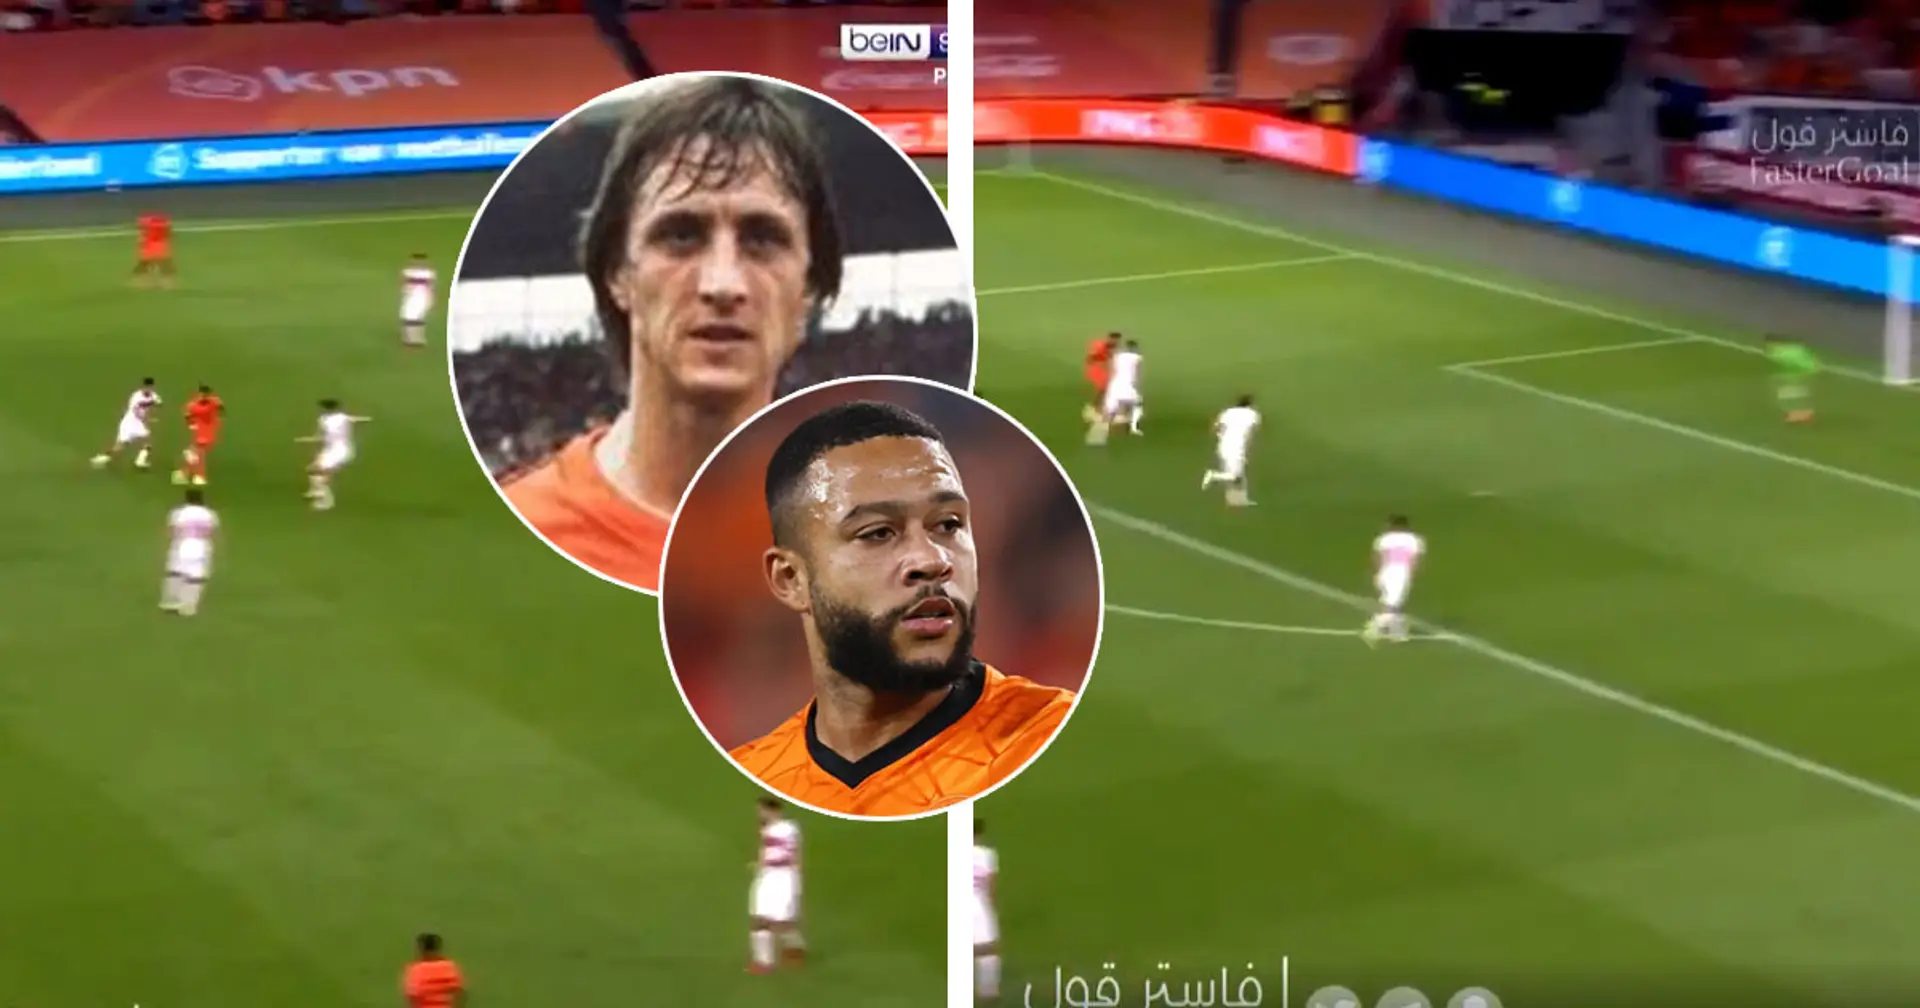 Memphis equals Cruyff's record for Dutch NT with hat-trick, scores stunning golazo